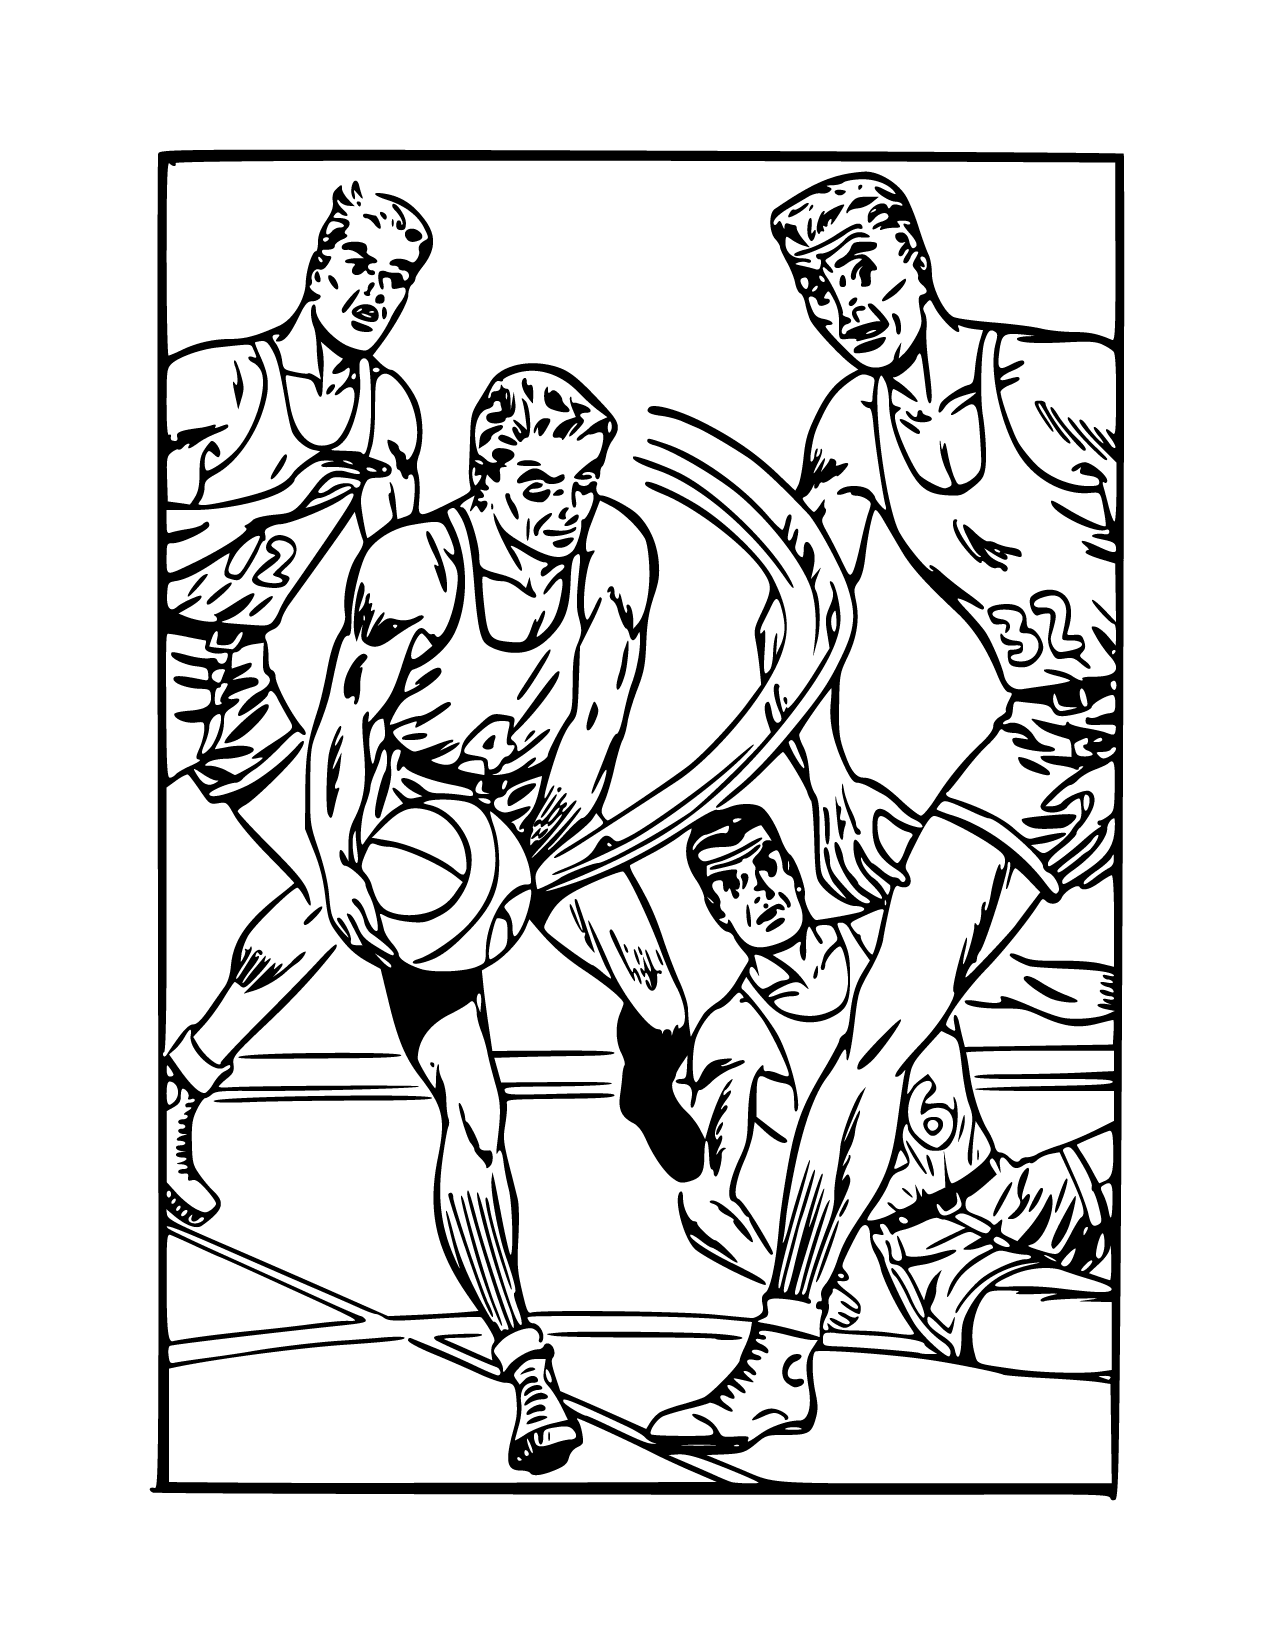 Vintage Basketball Players Coloring Page